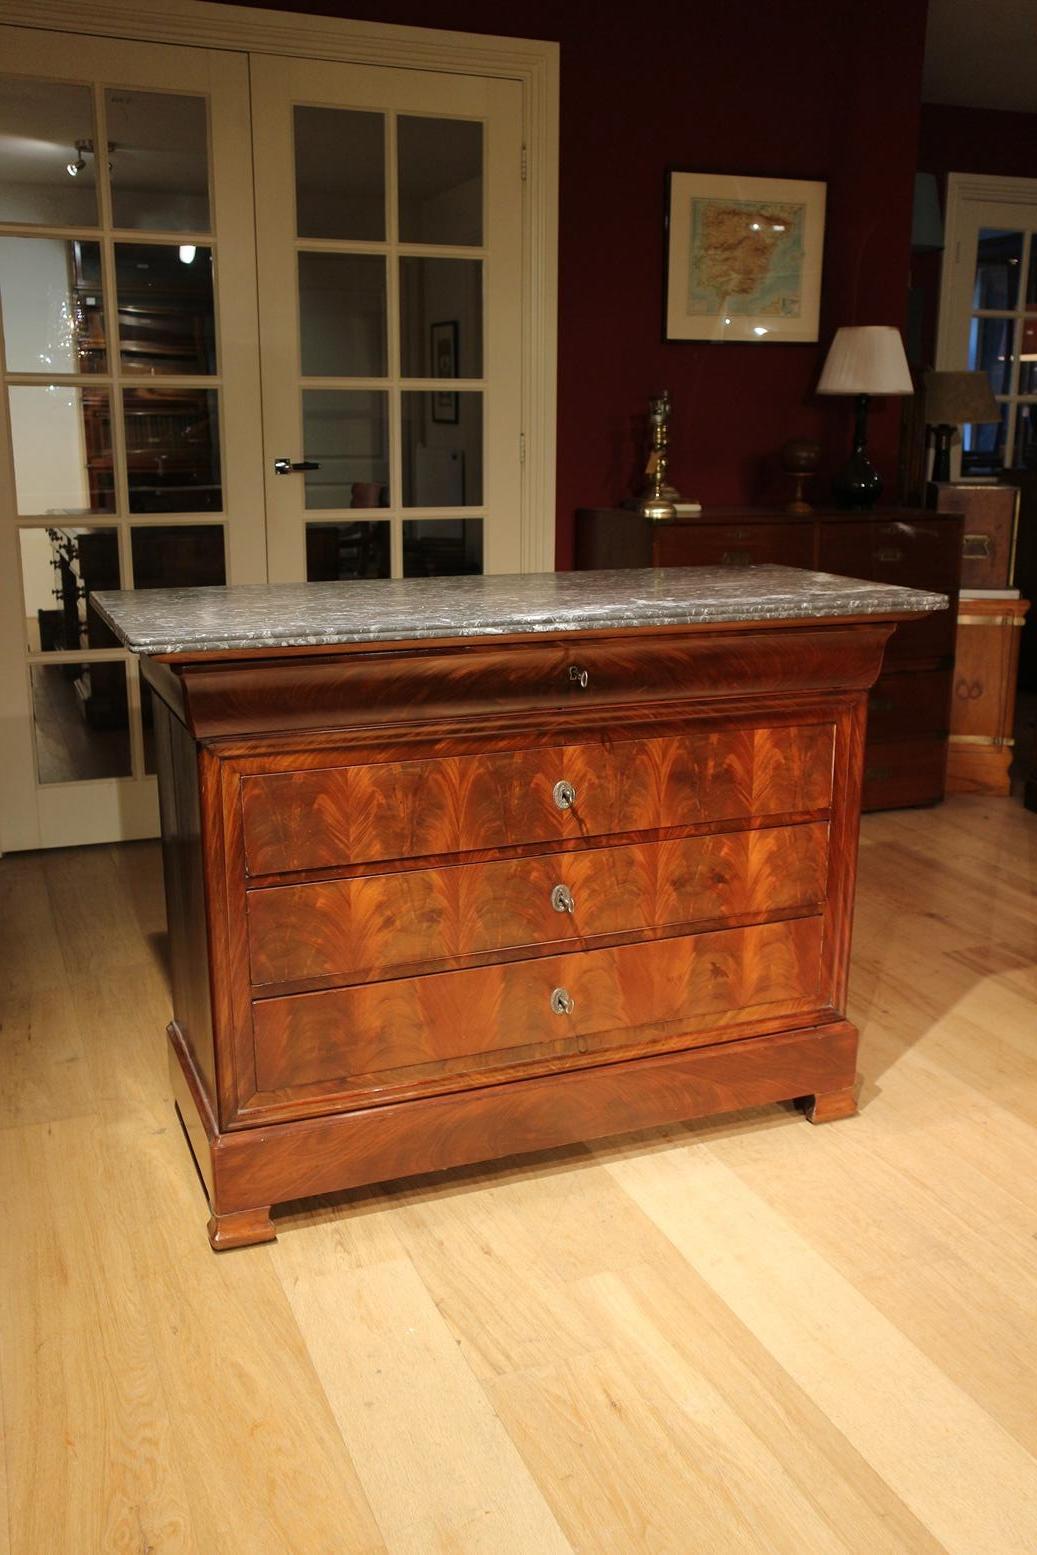 Beautiful Louis Philippemahogany chest of drawers with marble top in very good condition. The front is made of beautiful mahogany, entirely in pattern. Original marble top in the perfect color. Both the top plinth and bottom plinth are drawers.